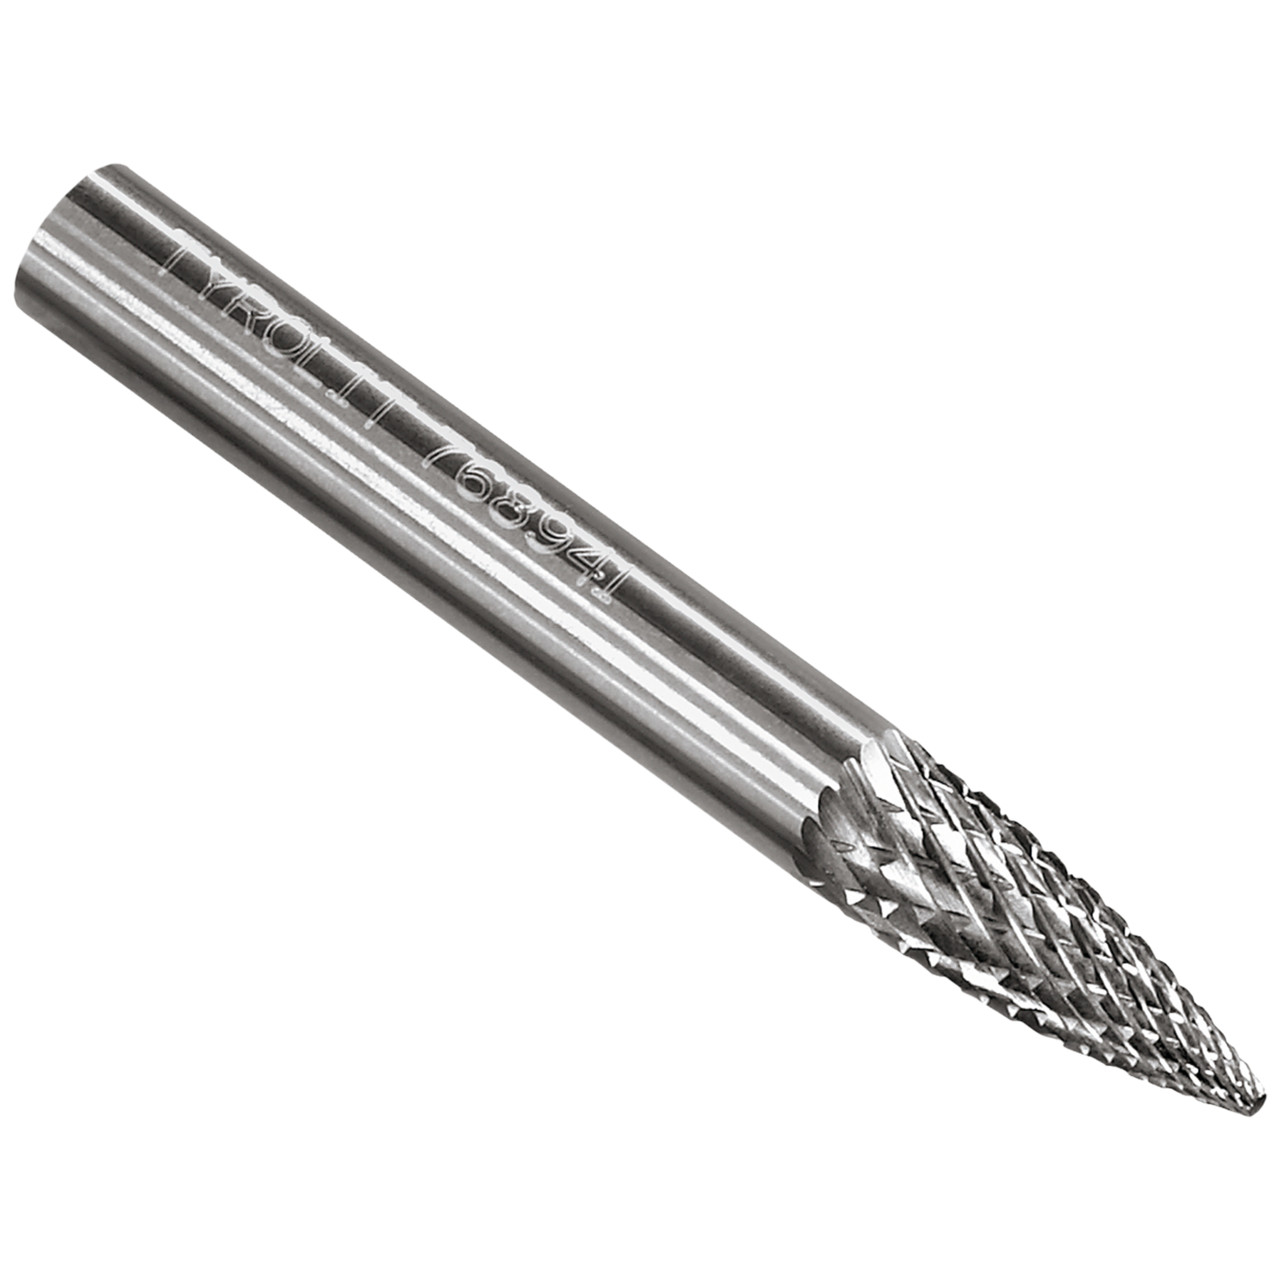 Tyrolit Carbide end mill DxT-SxL 16x25-6x70 For cast iron, steel and stainless steel, shape: 52SPG - projectile, Art. 768951